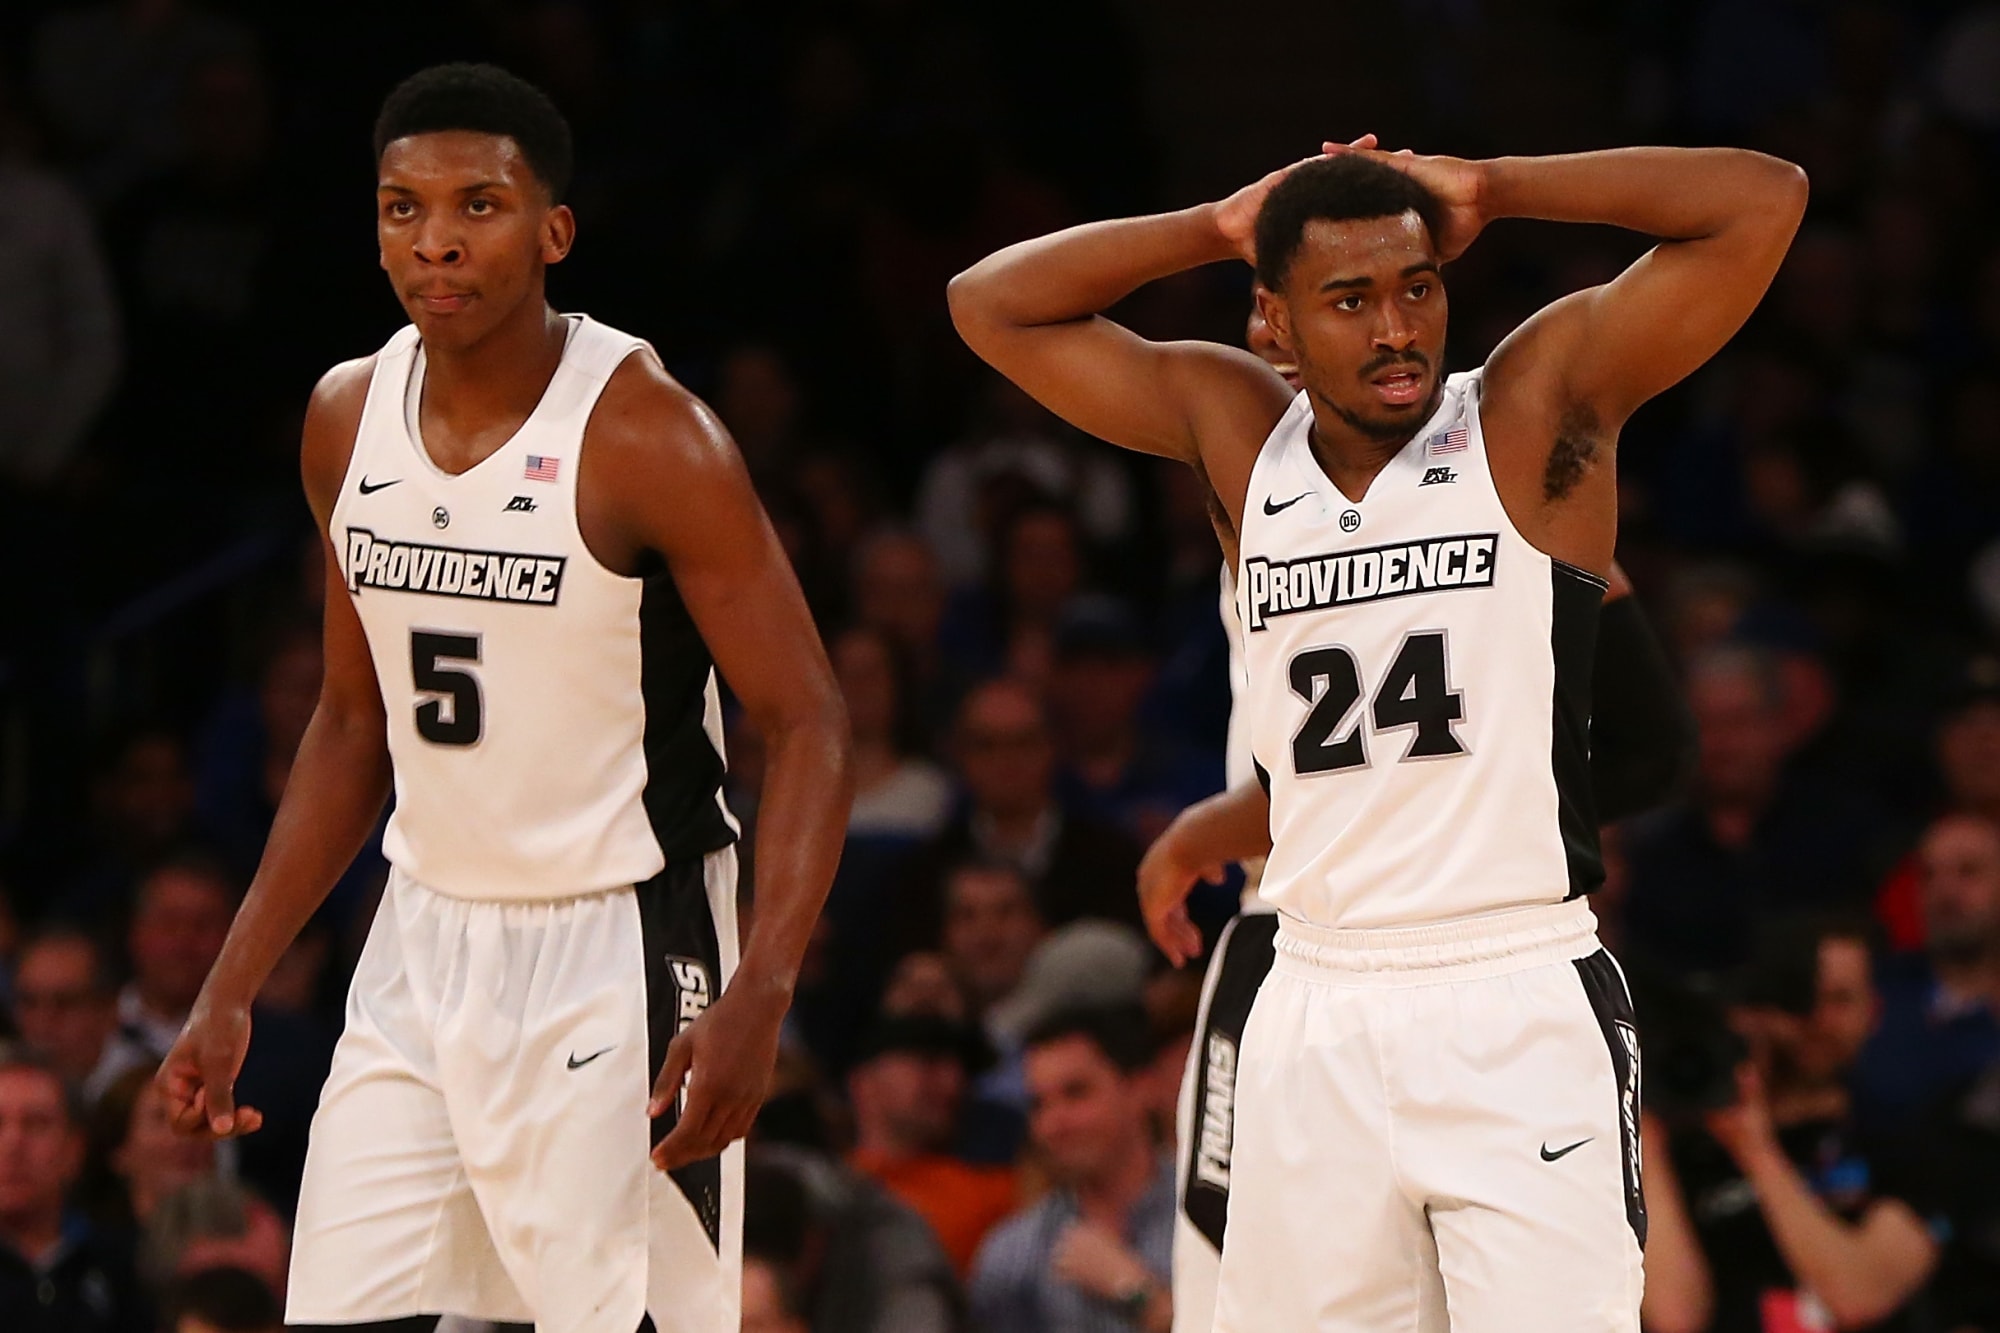 Providence Basketball Friars power through opponents in the 2K Classic